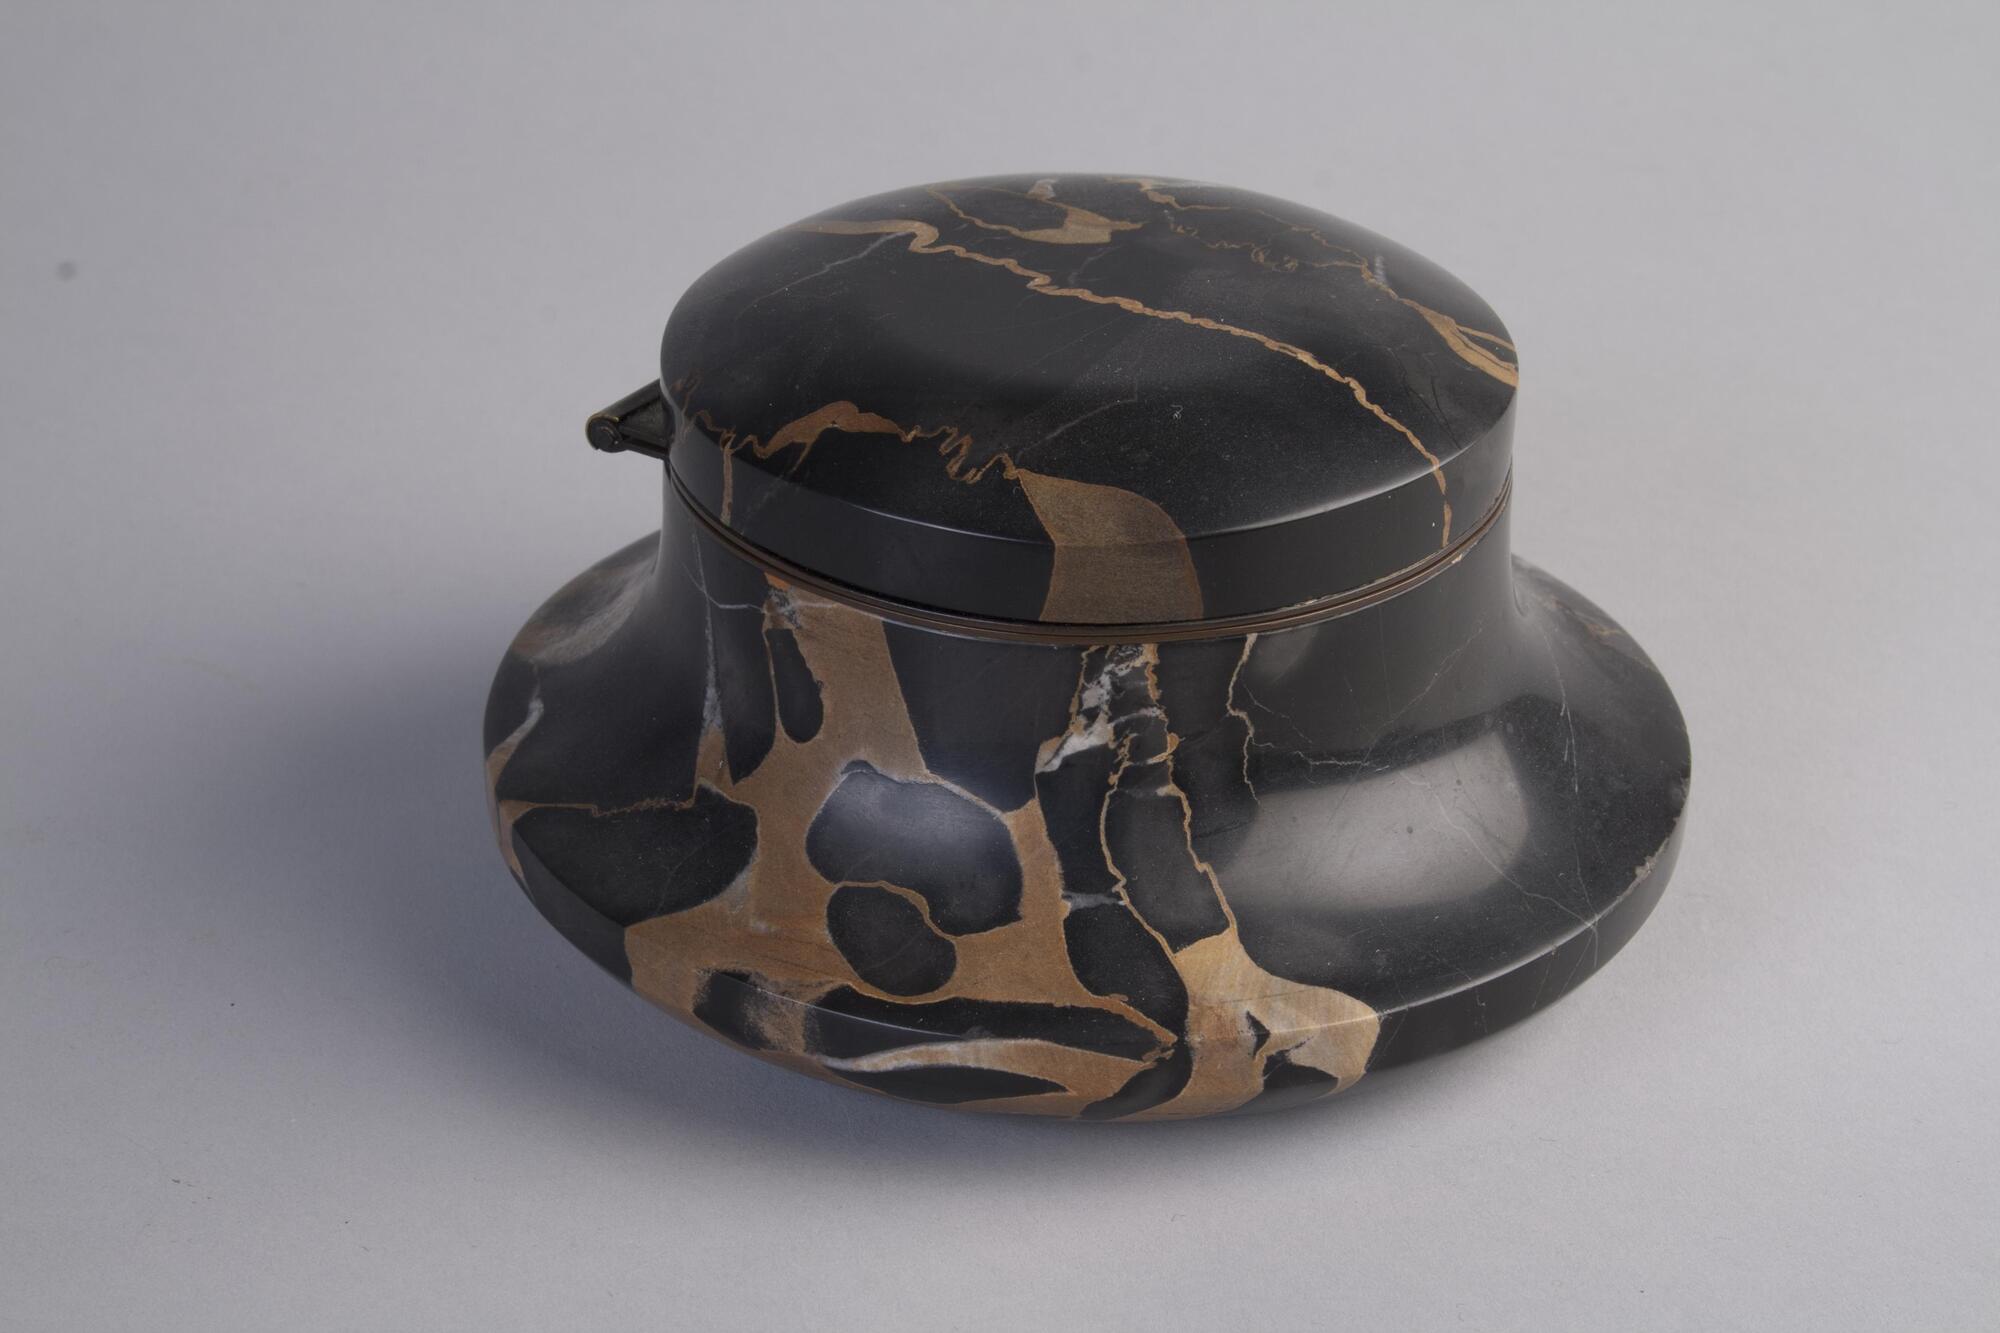 Inkwell made of black color marble has a flat and round body. There are some patterns on the marble that also serve as decoration on the body of the inkwell.